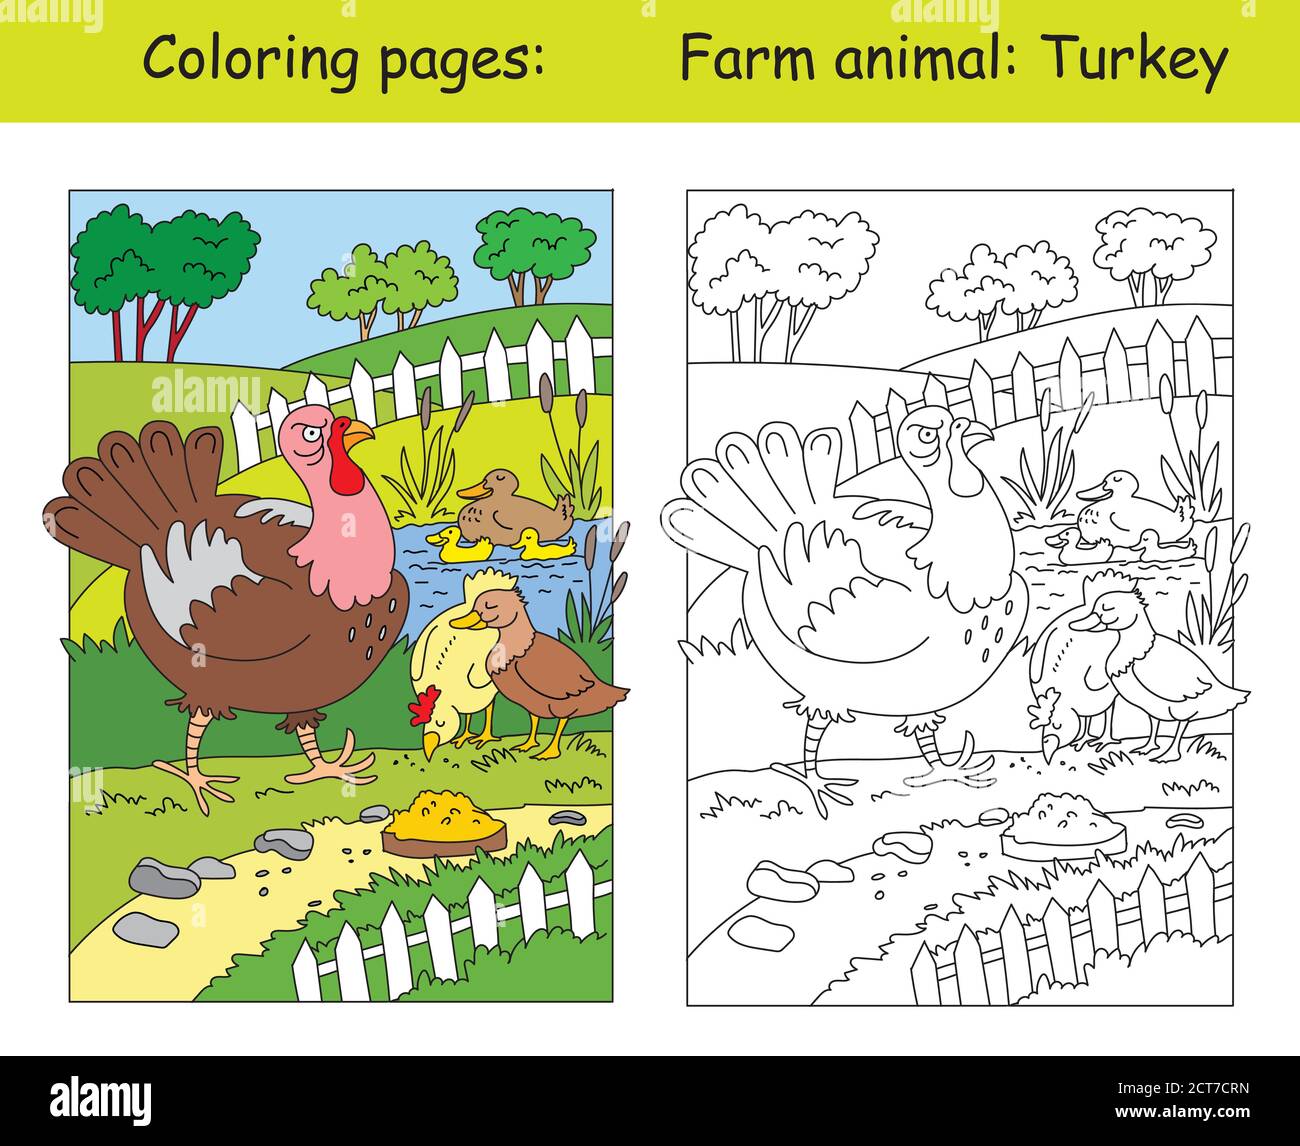 Coloring pages with funny angry turkey walking on the farm. Cartoon vector illustration. Coloring and colored image of turkey. Stock illustration for Stock Vector